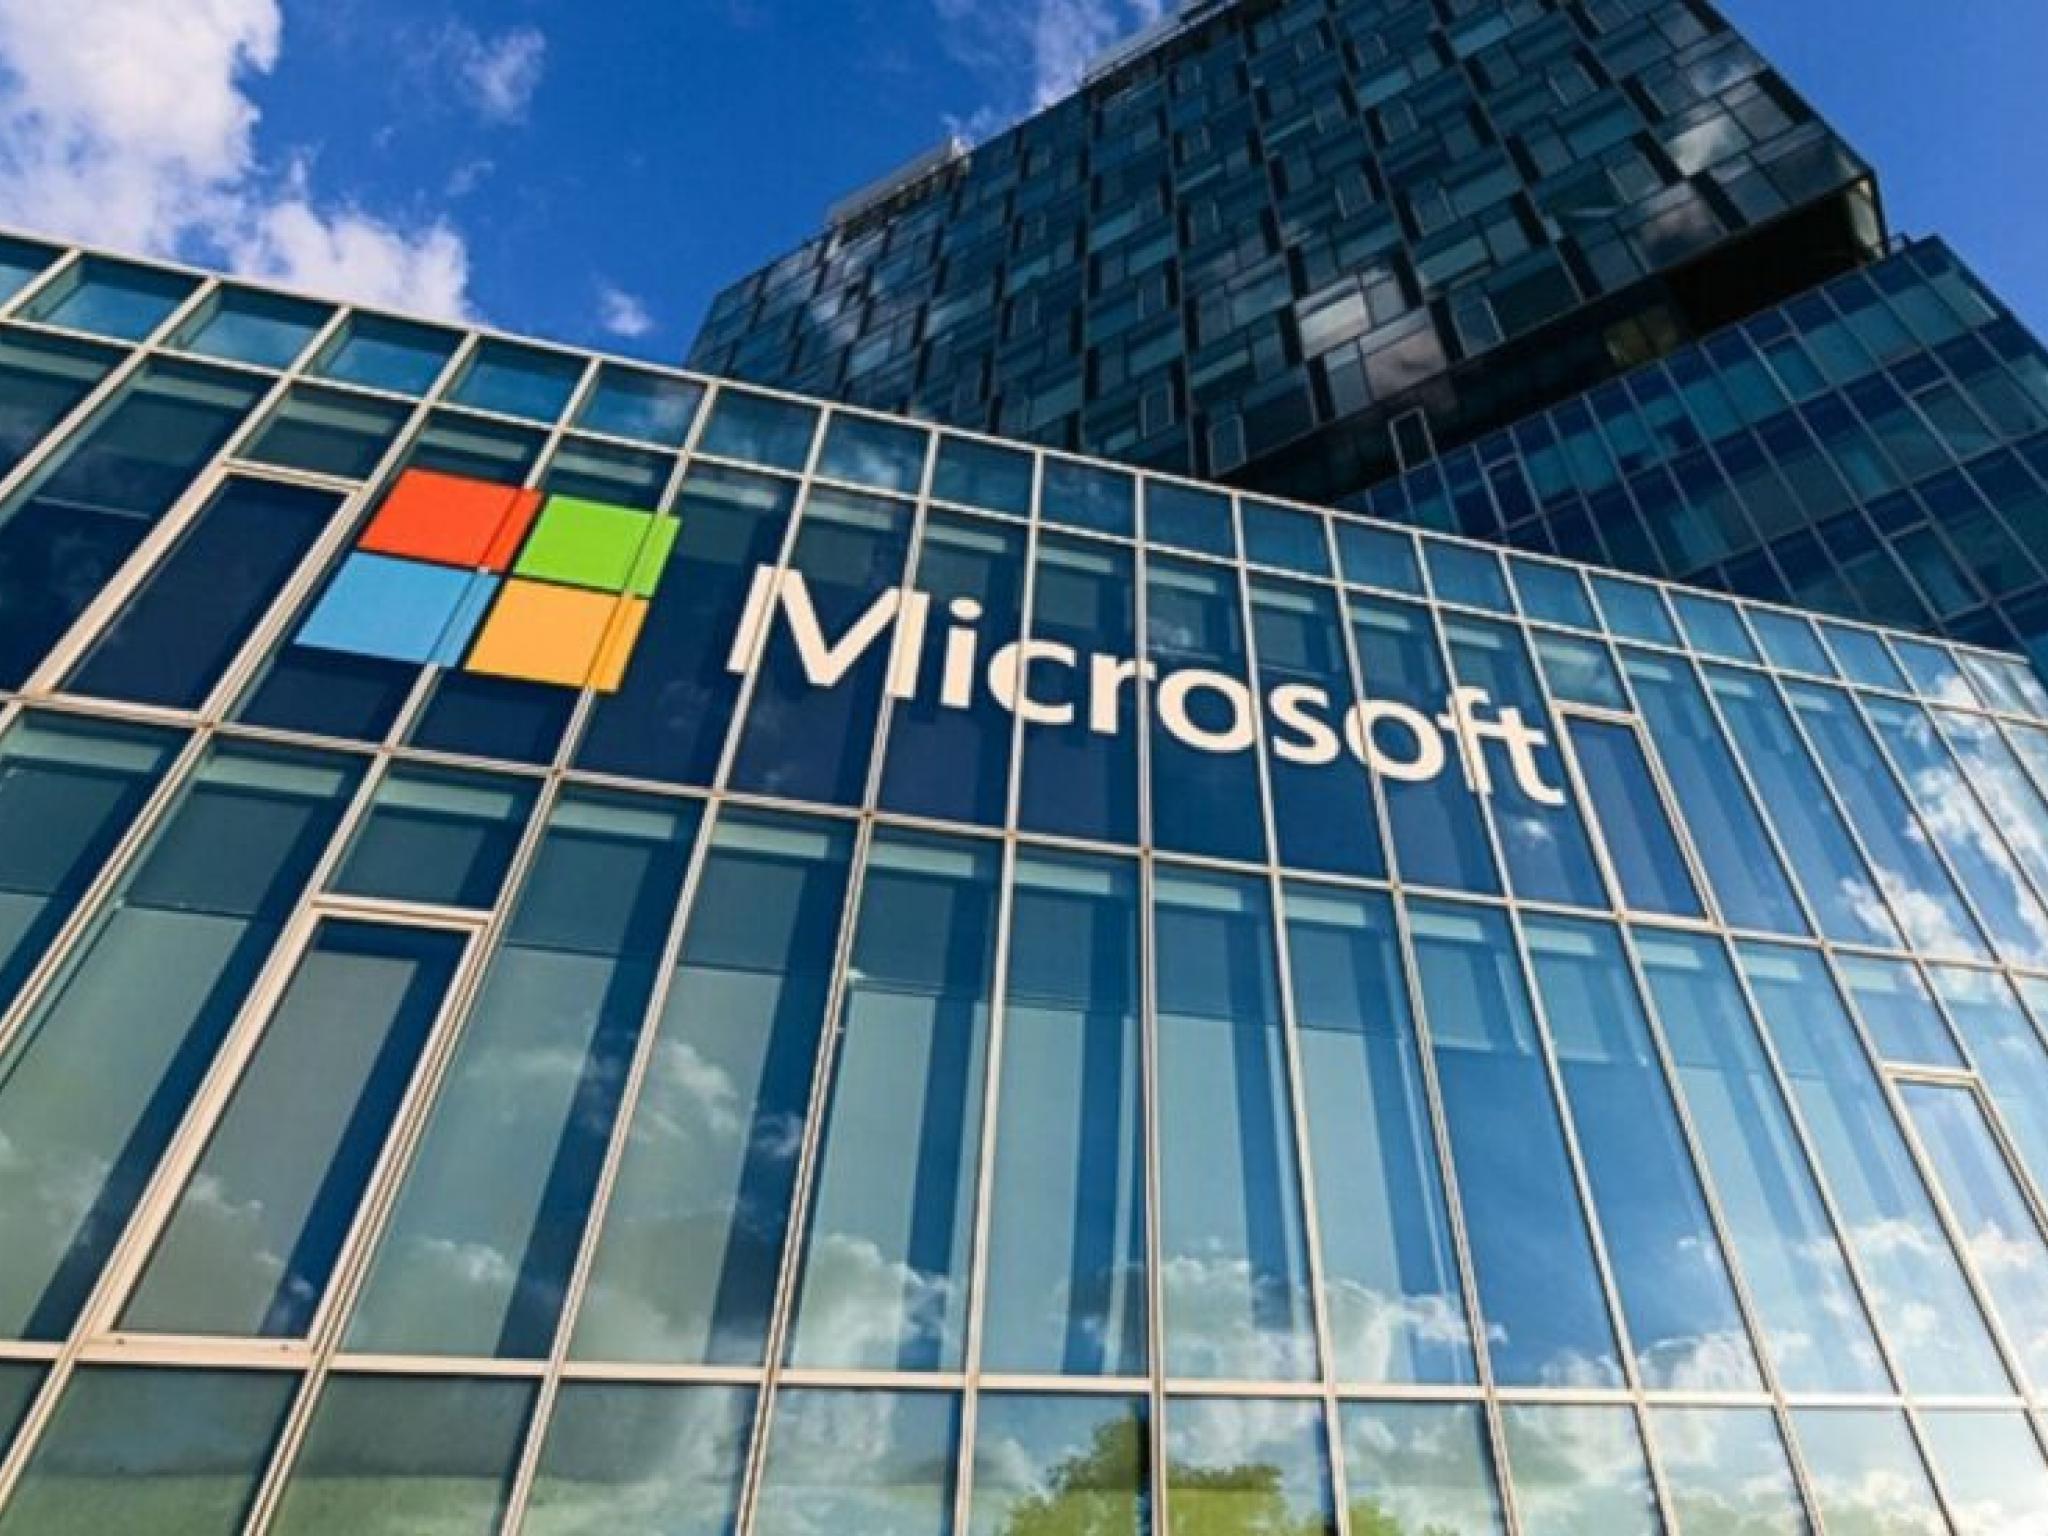  microsoft-carries-out-another-round-of-layoffs-across-teams-and-geographies-third-this-year-so-far 